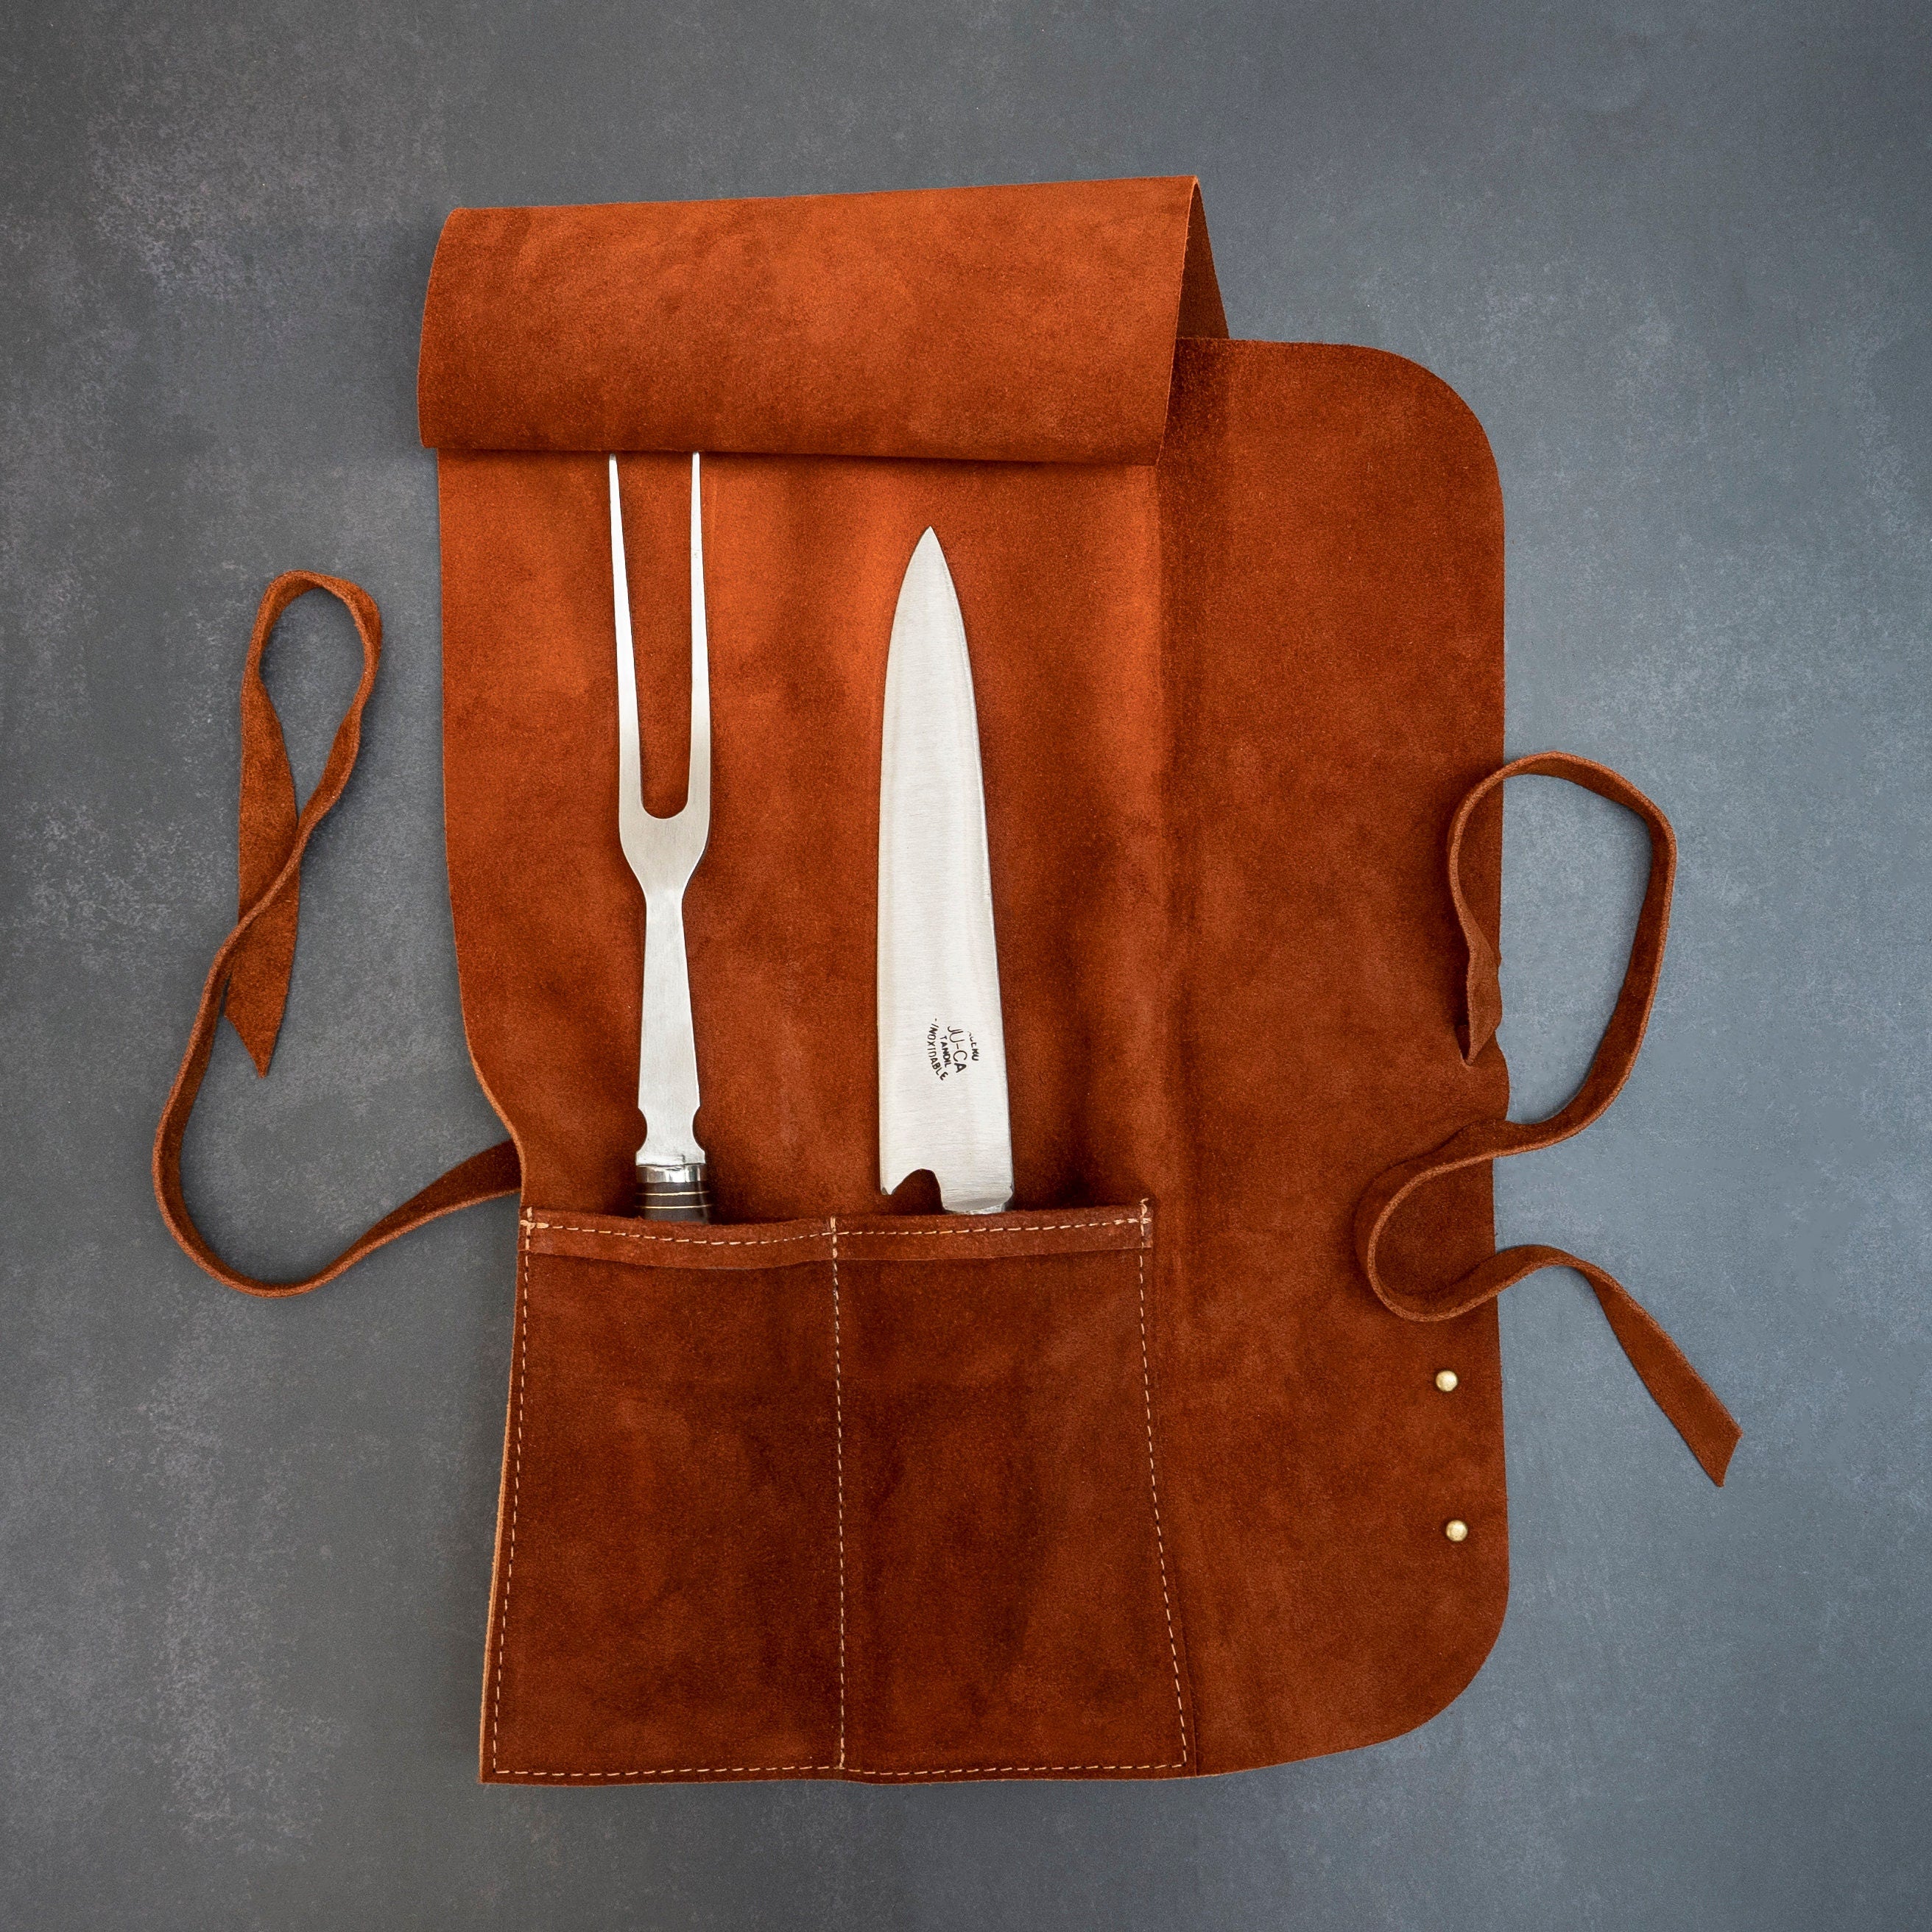 Gaucholife Gaucho Knife and Fork Carving Set,